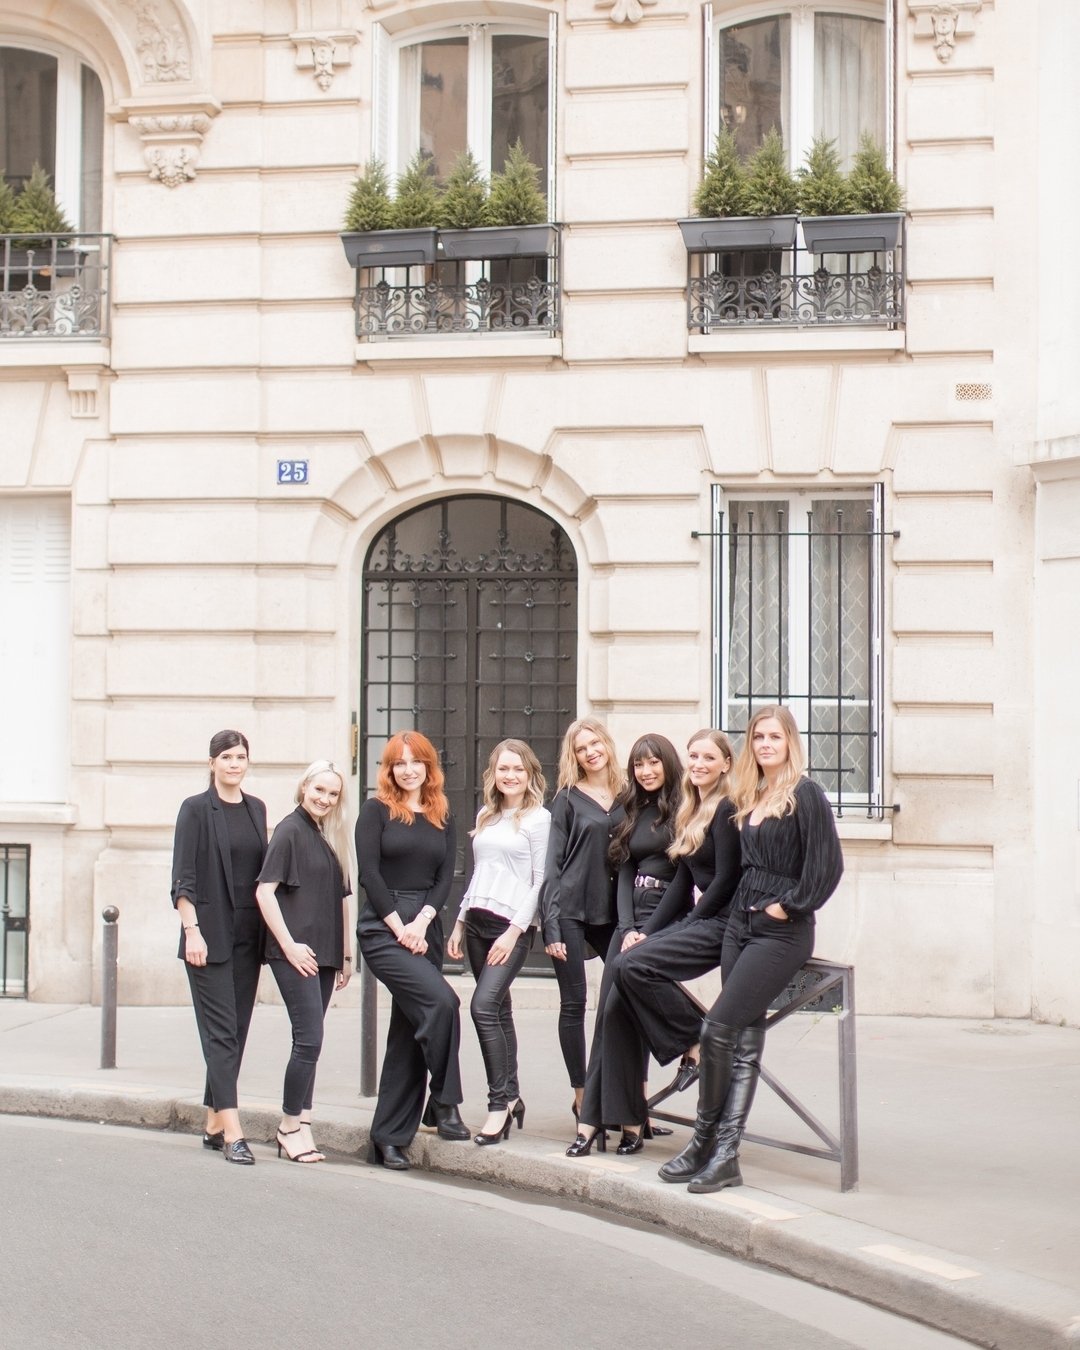 Bonjour from Paris, France! 🇫🇷⁠

It's been quite some time that we introduced our team, so let's take a moment to do just that!

I'm Onorina Jomir, the founder of Onorina Jomir Beauty (the one wearing the white top in our team photo 🙋&zwj;♀️).

At